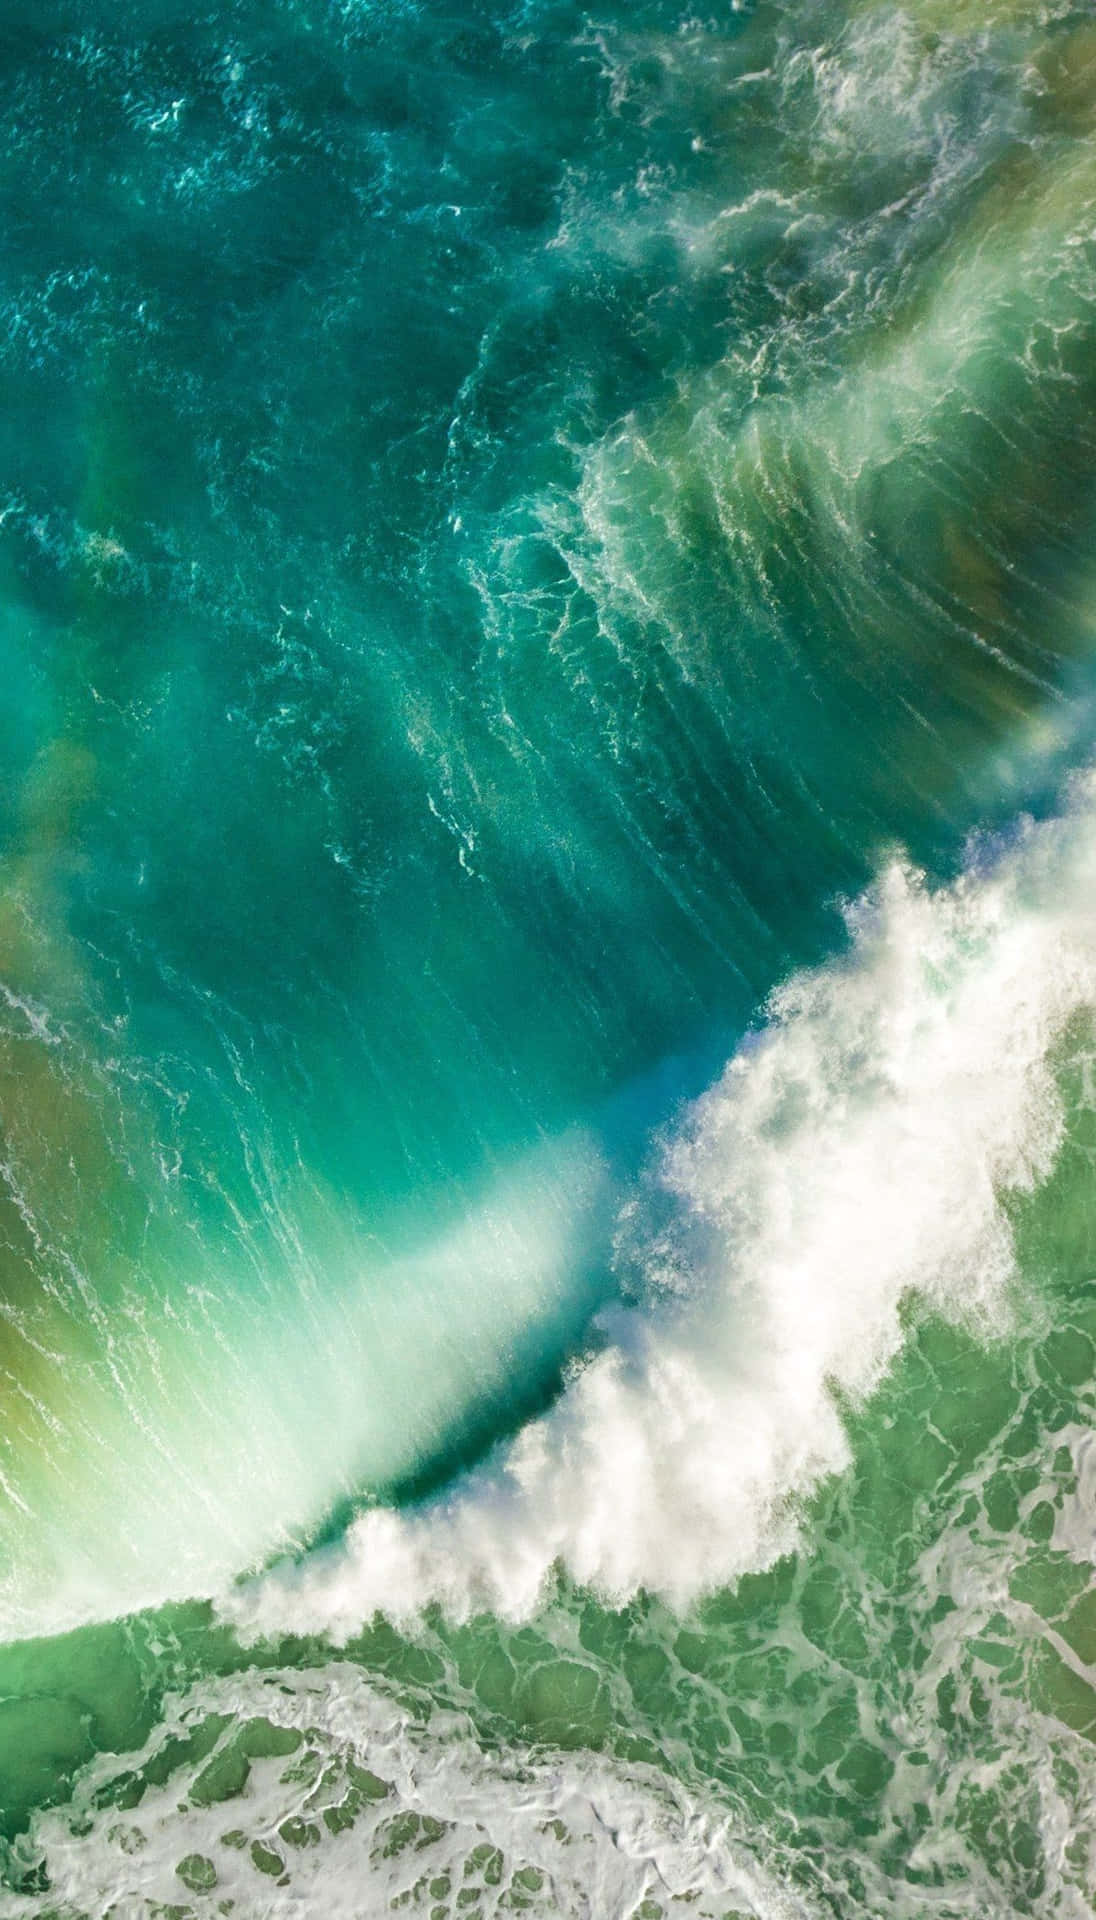 A Surfer Is Riding A Wave In The Ocean Wallpaper